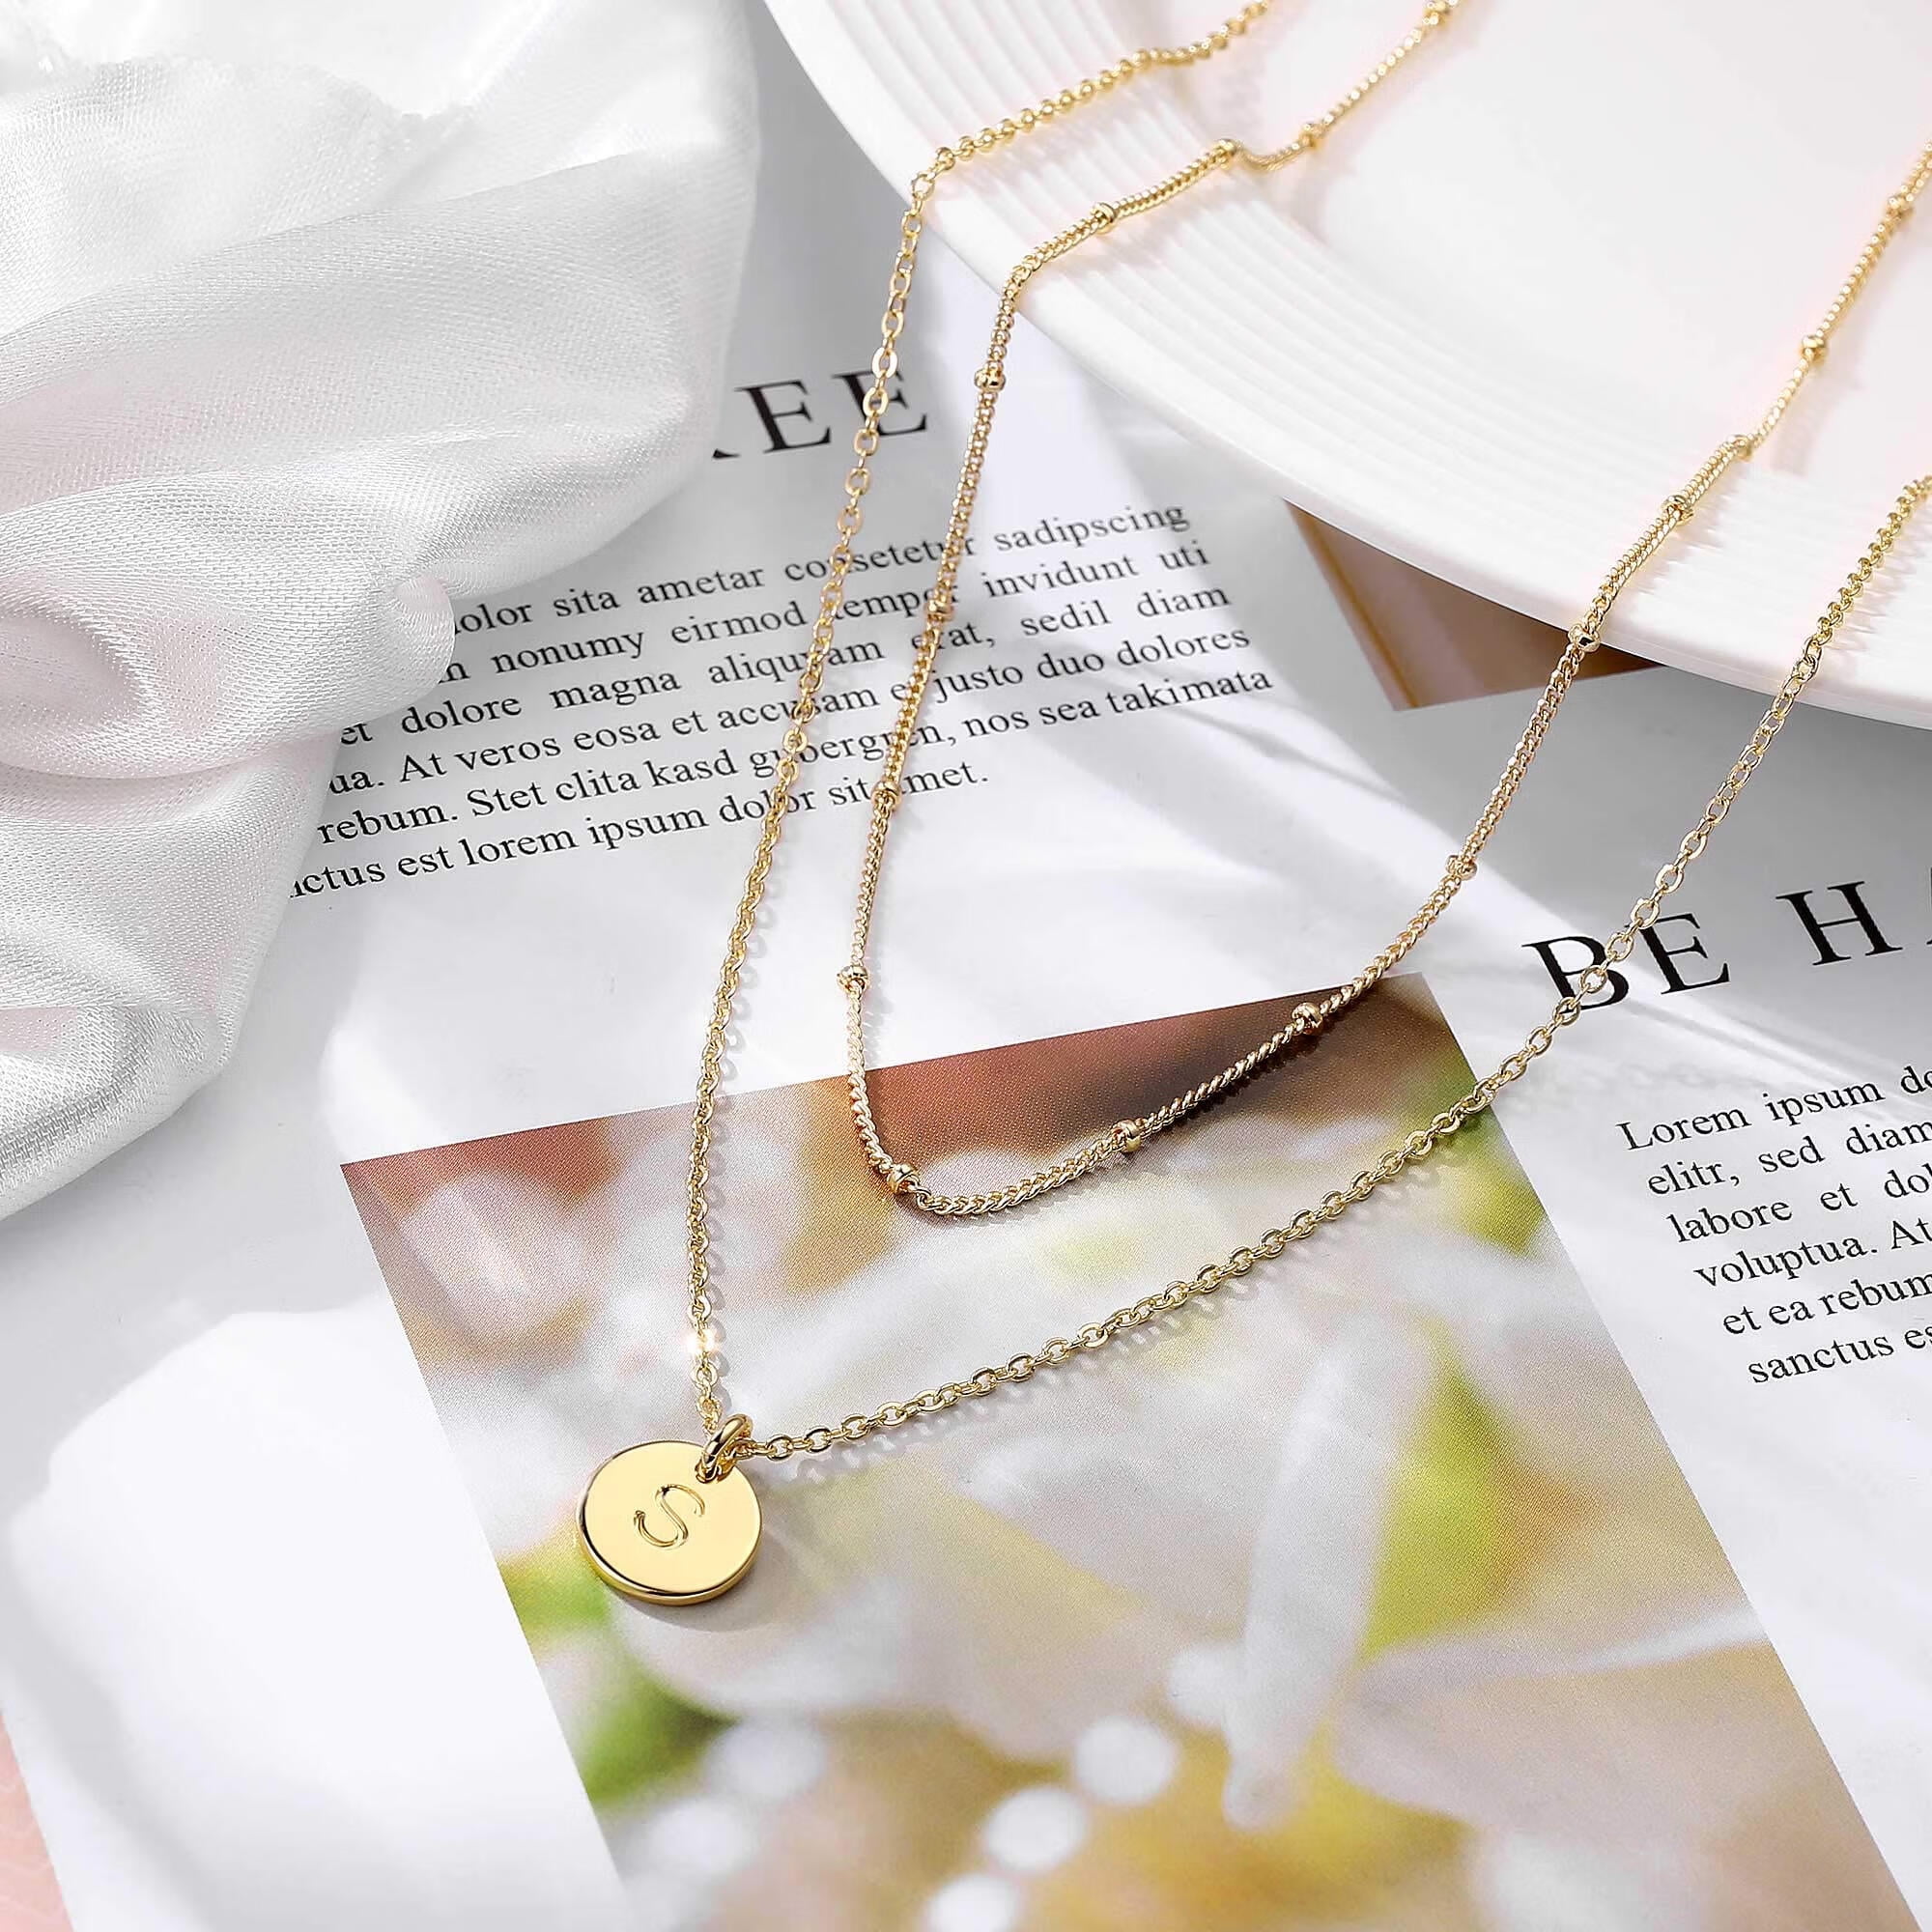 Silver,Gold,Rose Gold Layered Necklaces // Personalized Disk Necklaces // Layering  Necklaces // Set of